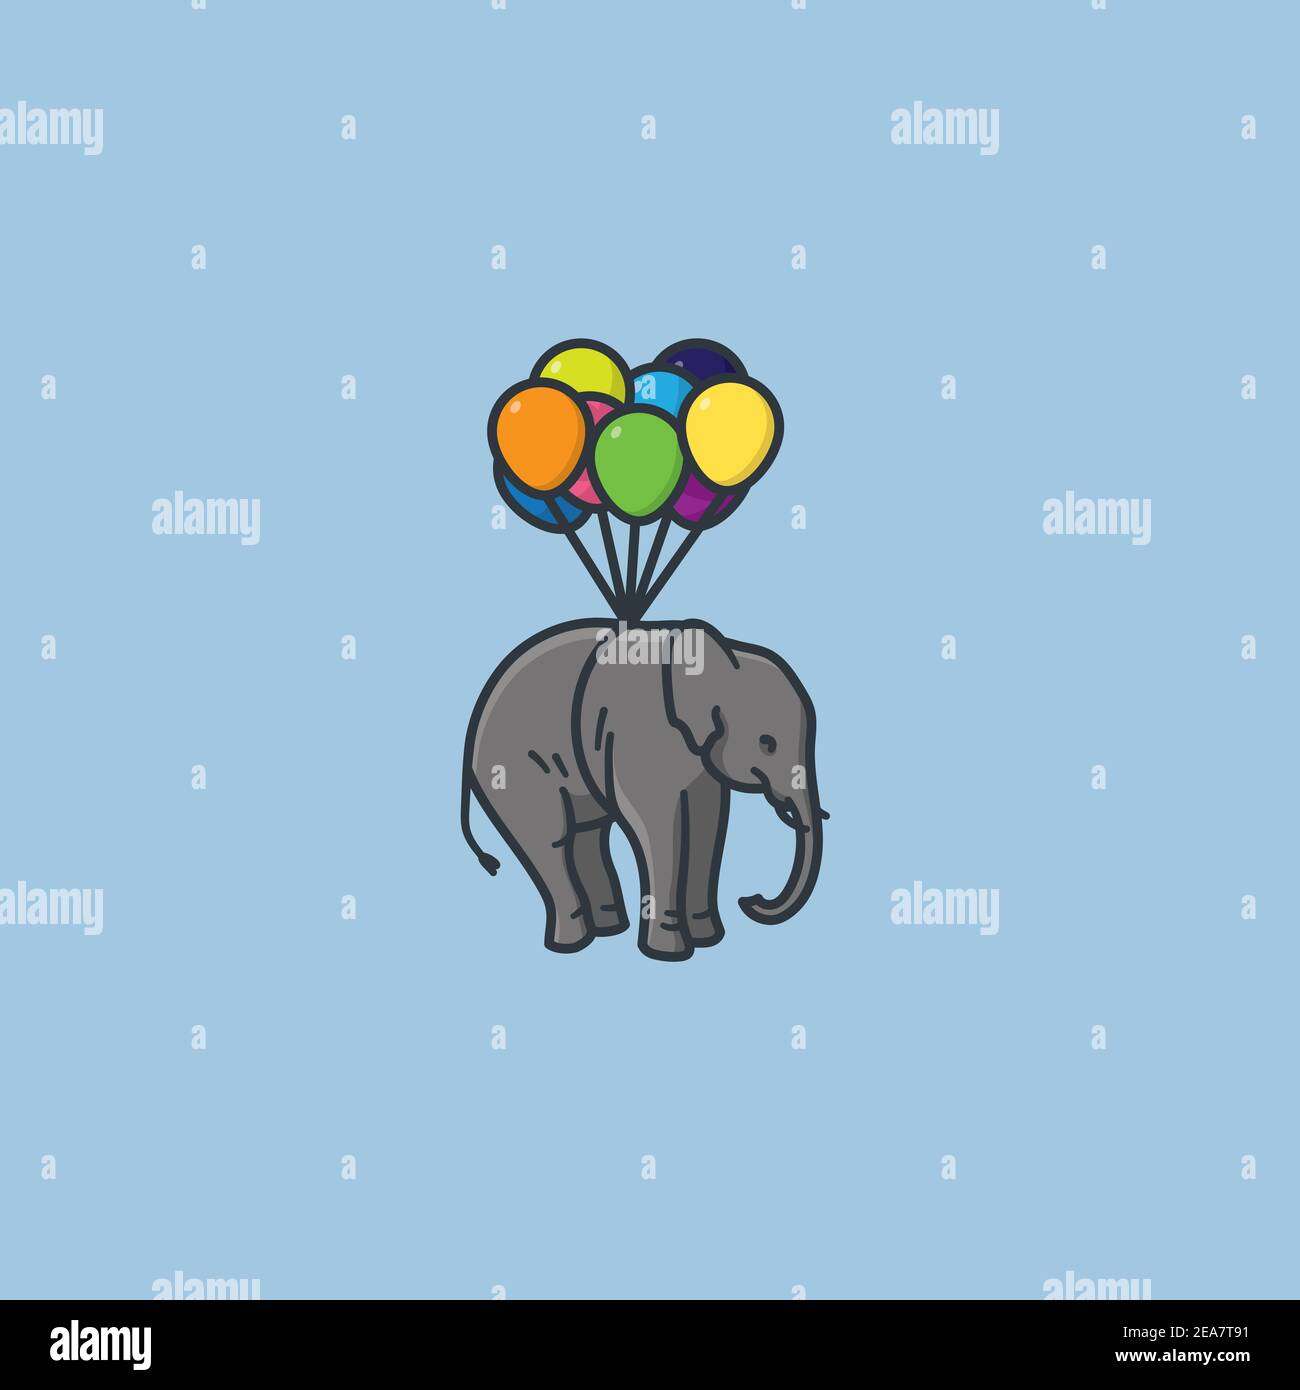 Elephant hanging on a bundle of balloons vector illustration for Balloons Around The World Day on October 5 Stock Vector